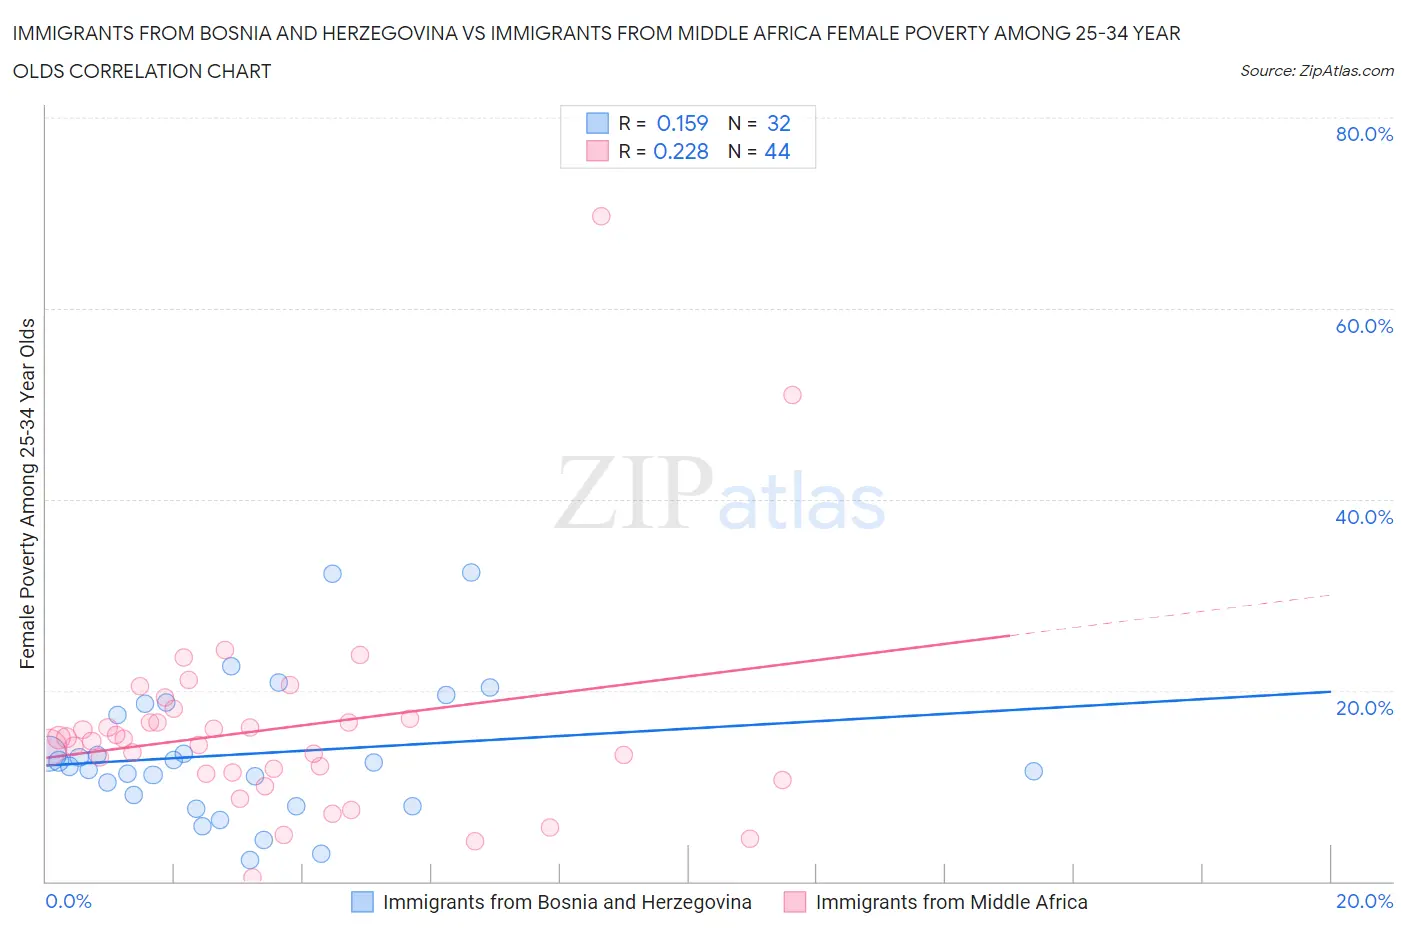 Immigrants from Bosnia and Herzegovina vs Immigrants from Middle Africa Female Poverty Among 25-34 Year Olds